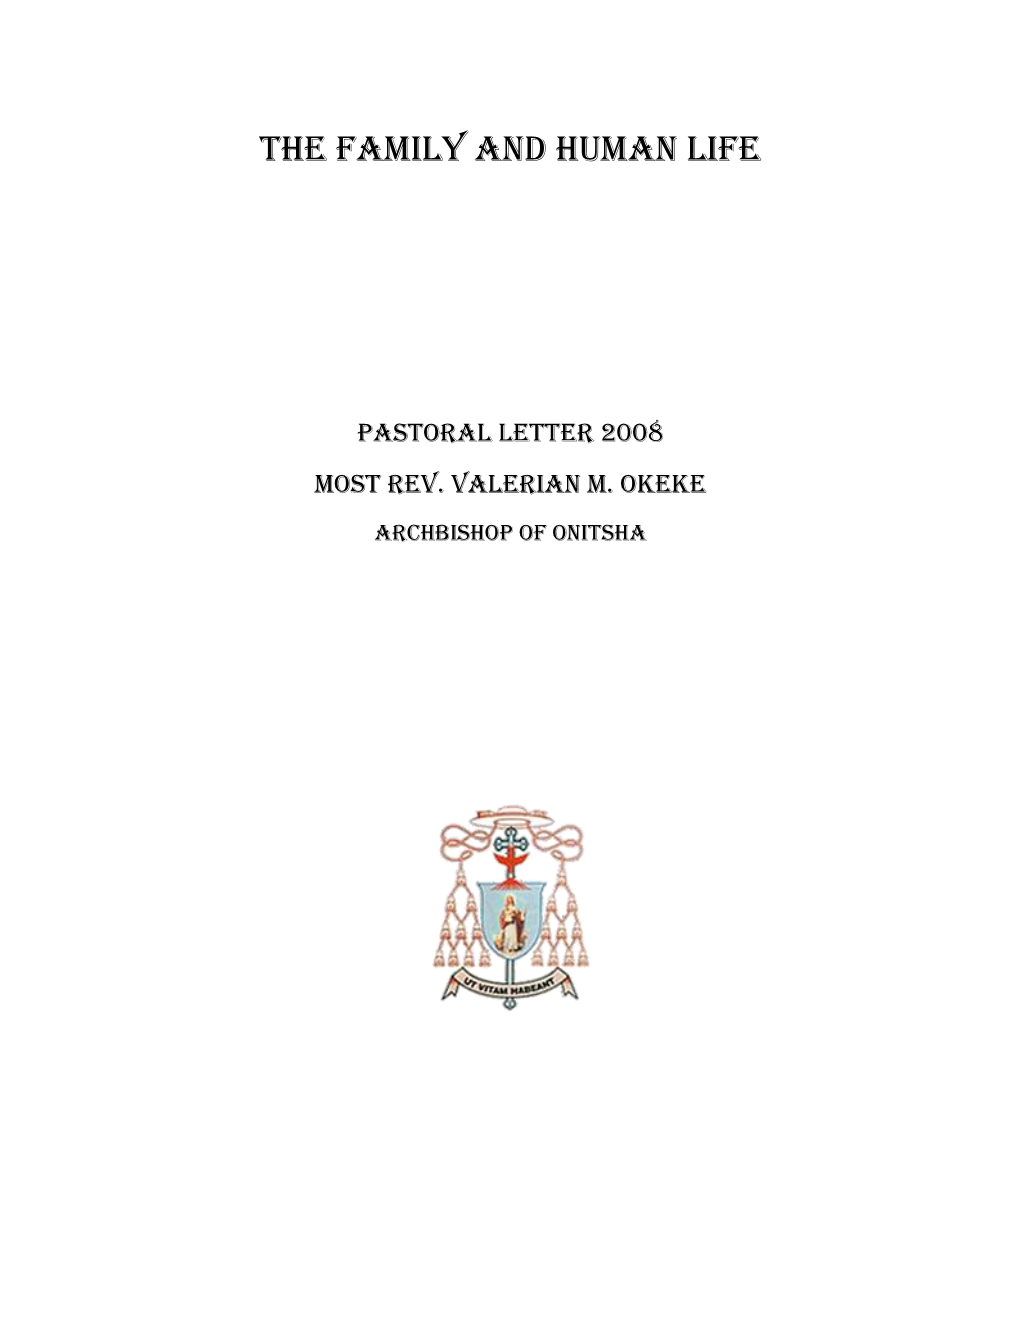 The Family and Human Life